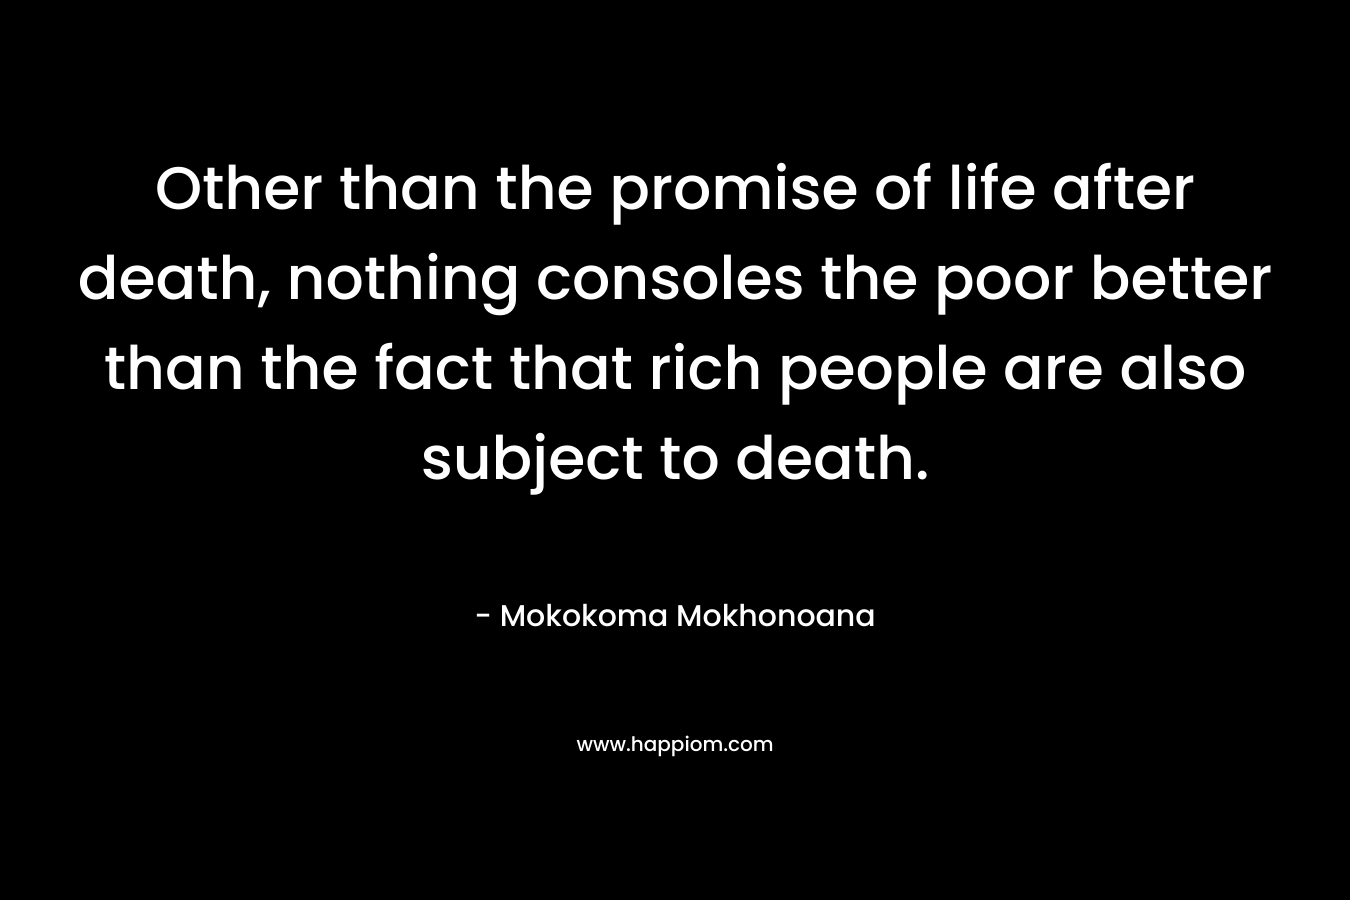 Other than the promise of life after death, nothing consoles the poor better than the fact that rich people are also subject to death.